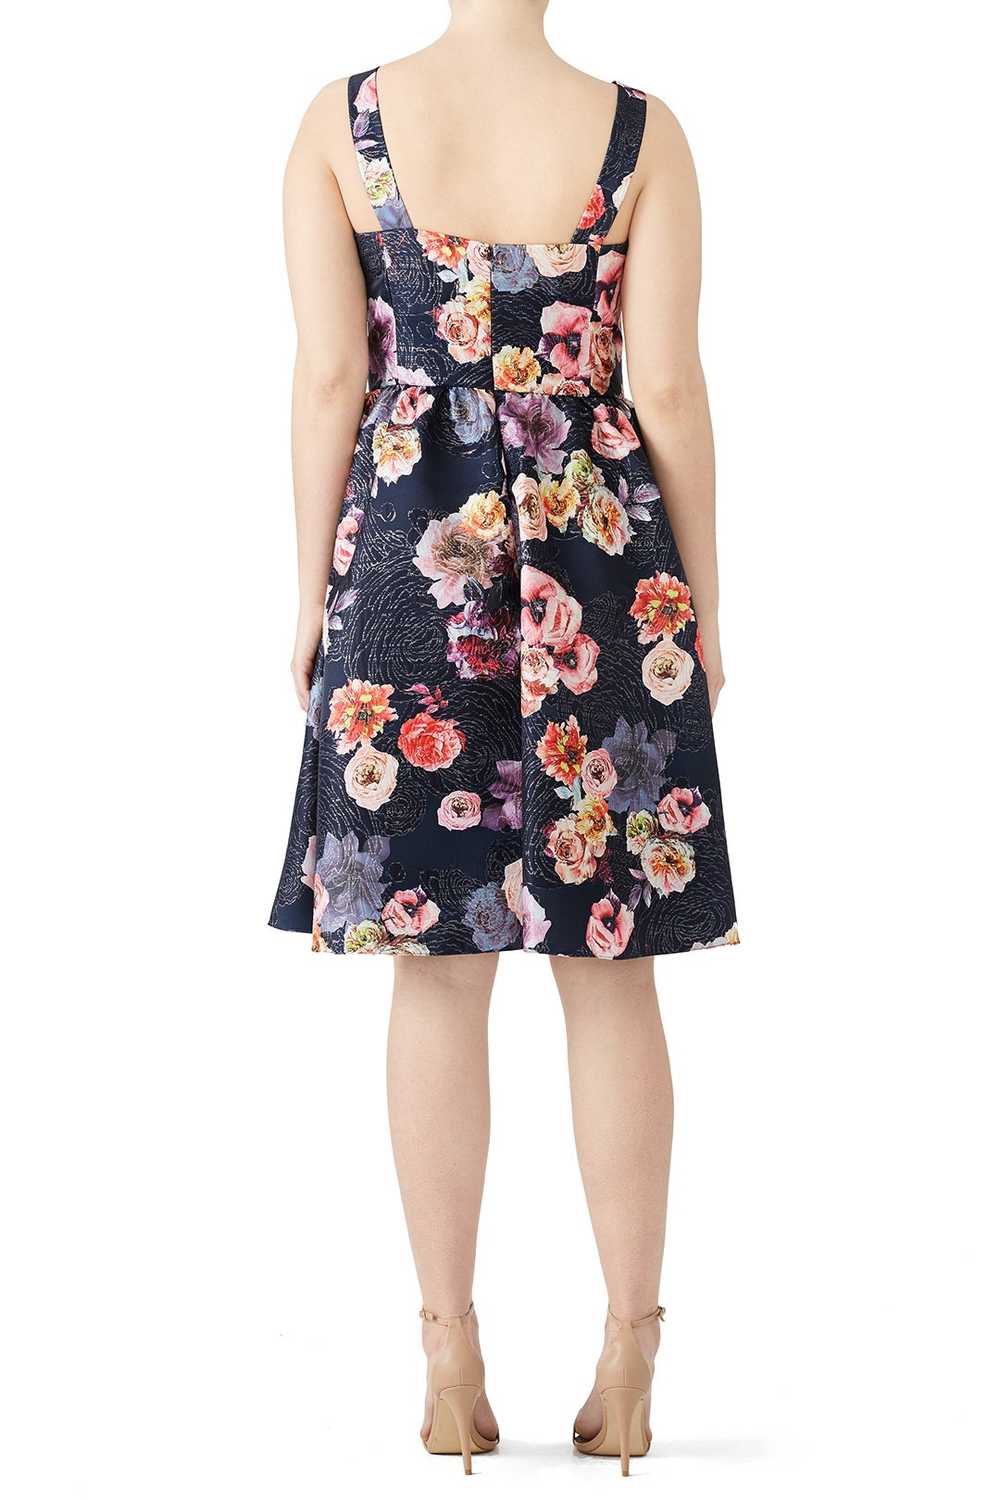 Christian Siriano Black Floral Cocktail Dress - image 4